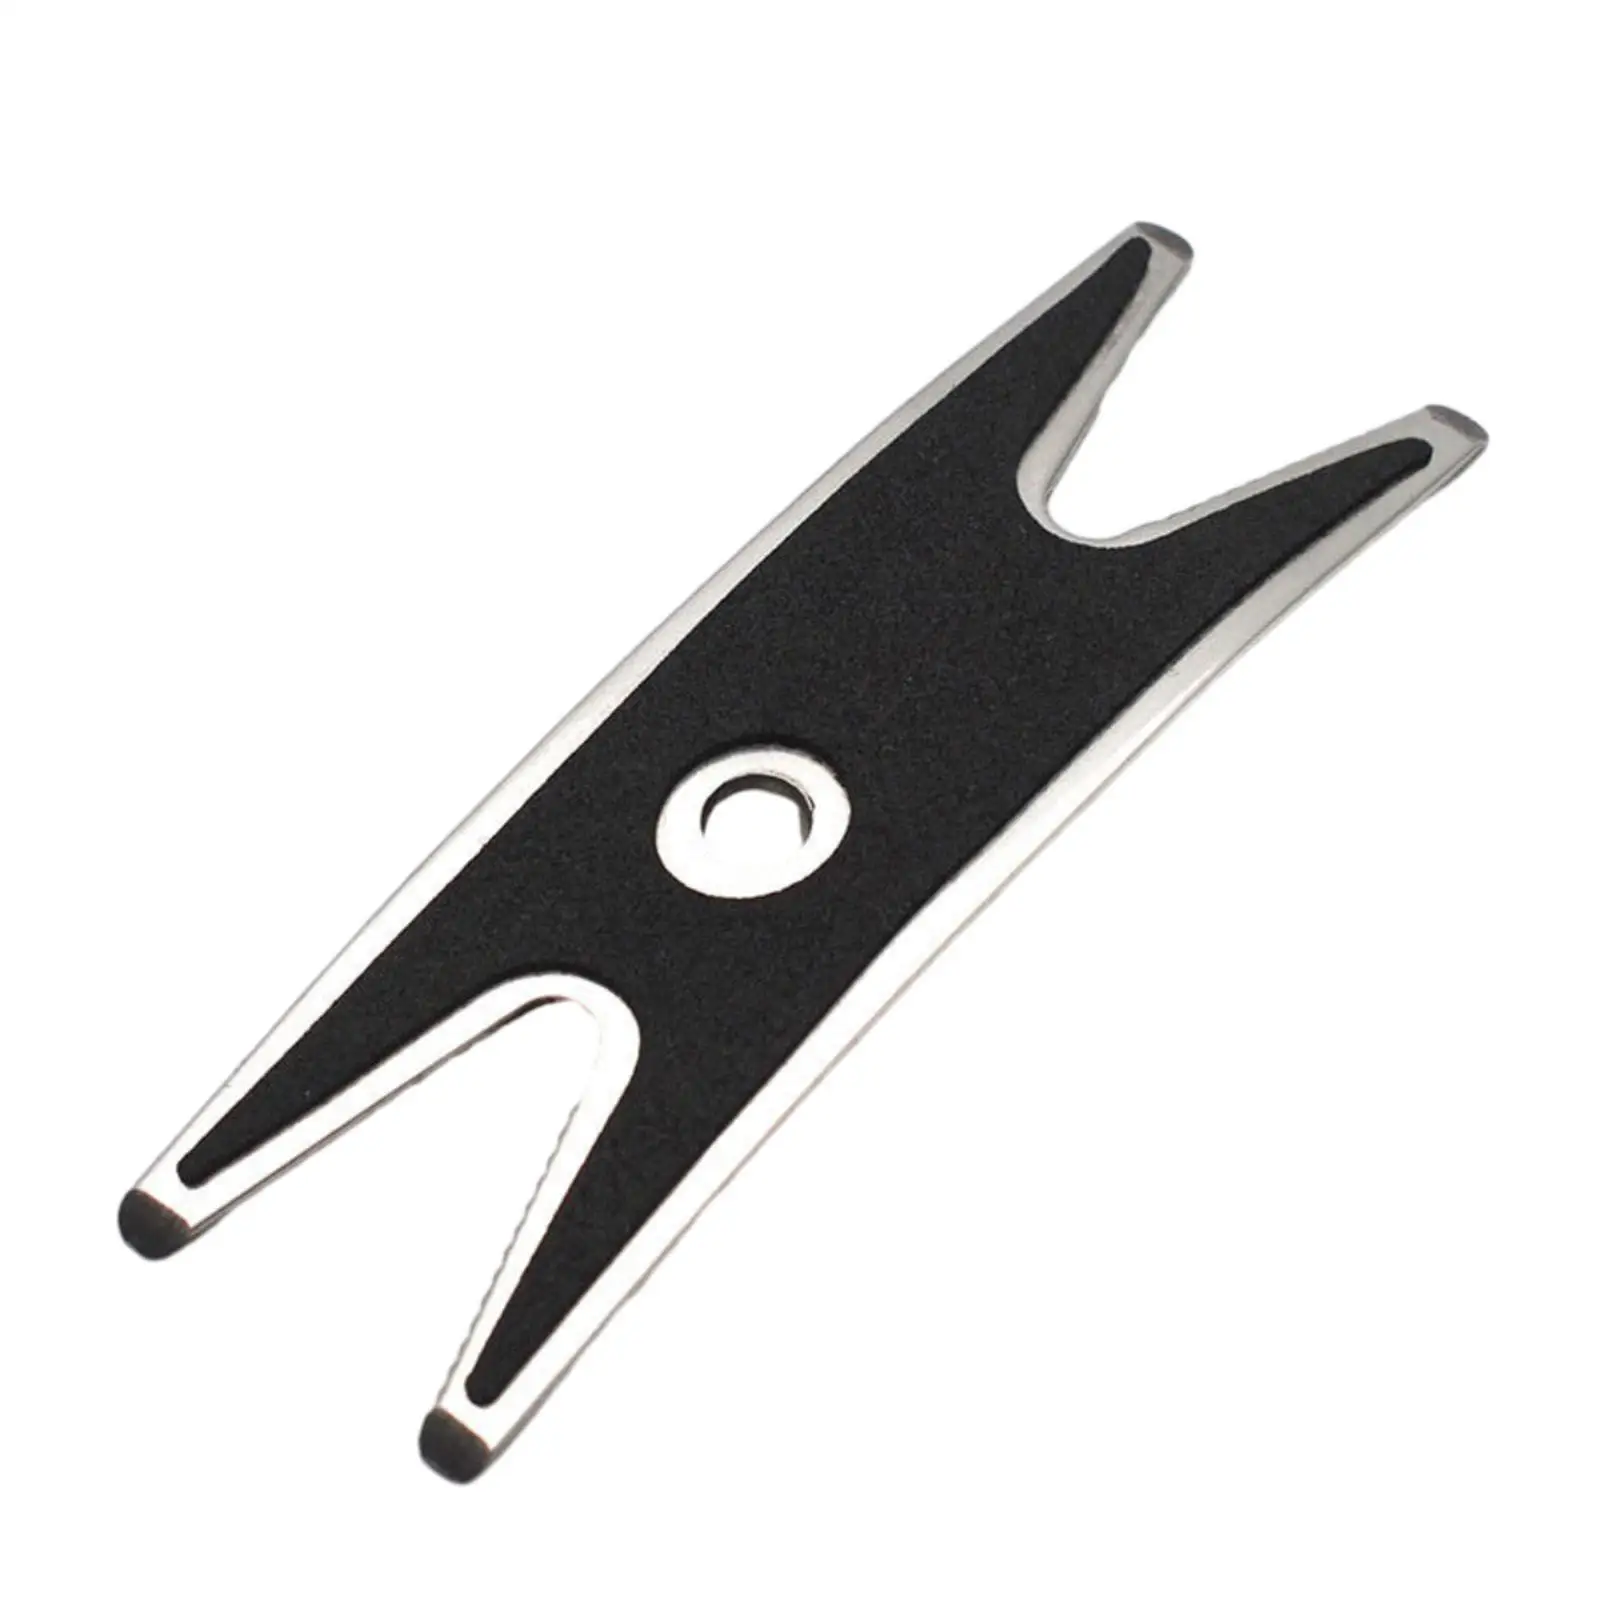 Guitar Bass Spanner Wrench Knob Jack Tuner Bushing Pocketable Tool Guitar Repair Wrench for Pots Jacks Switches Collar Gift